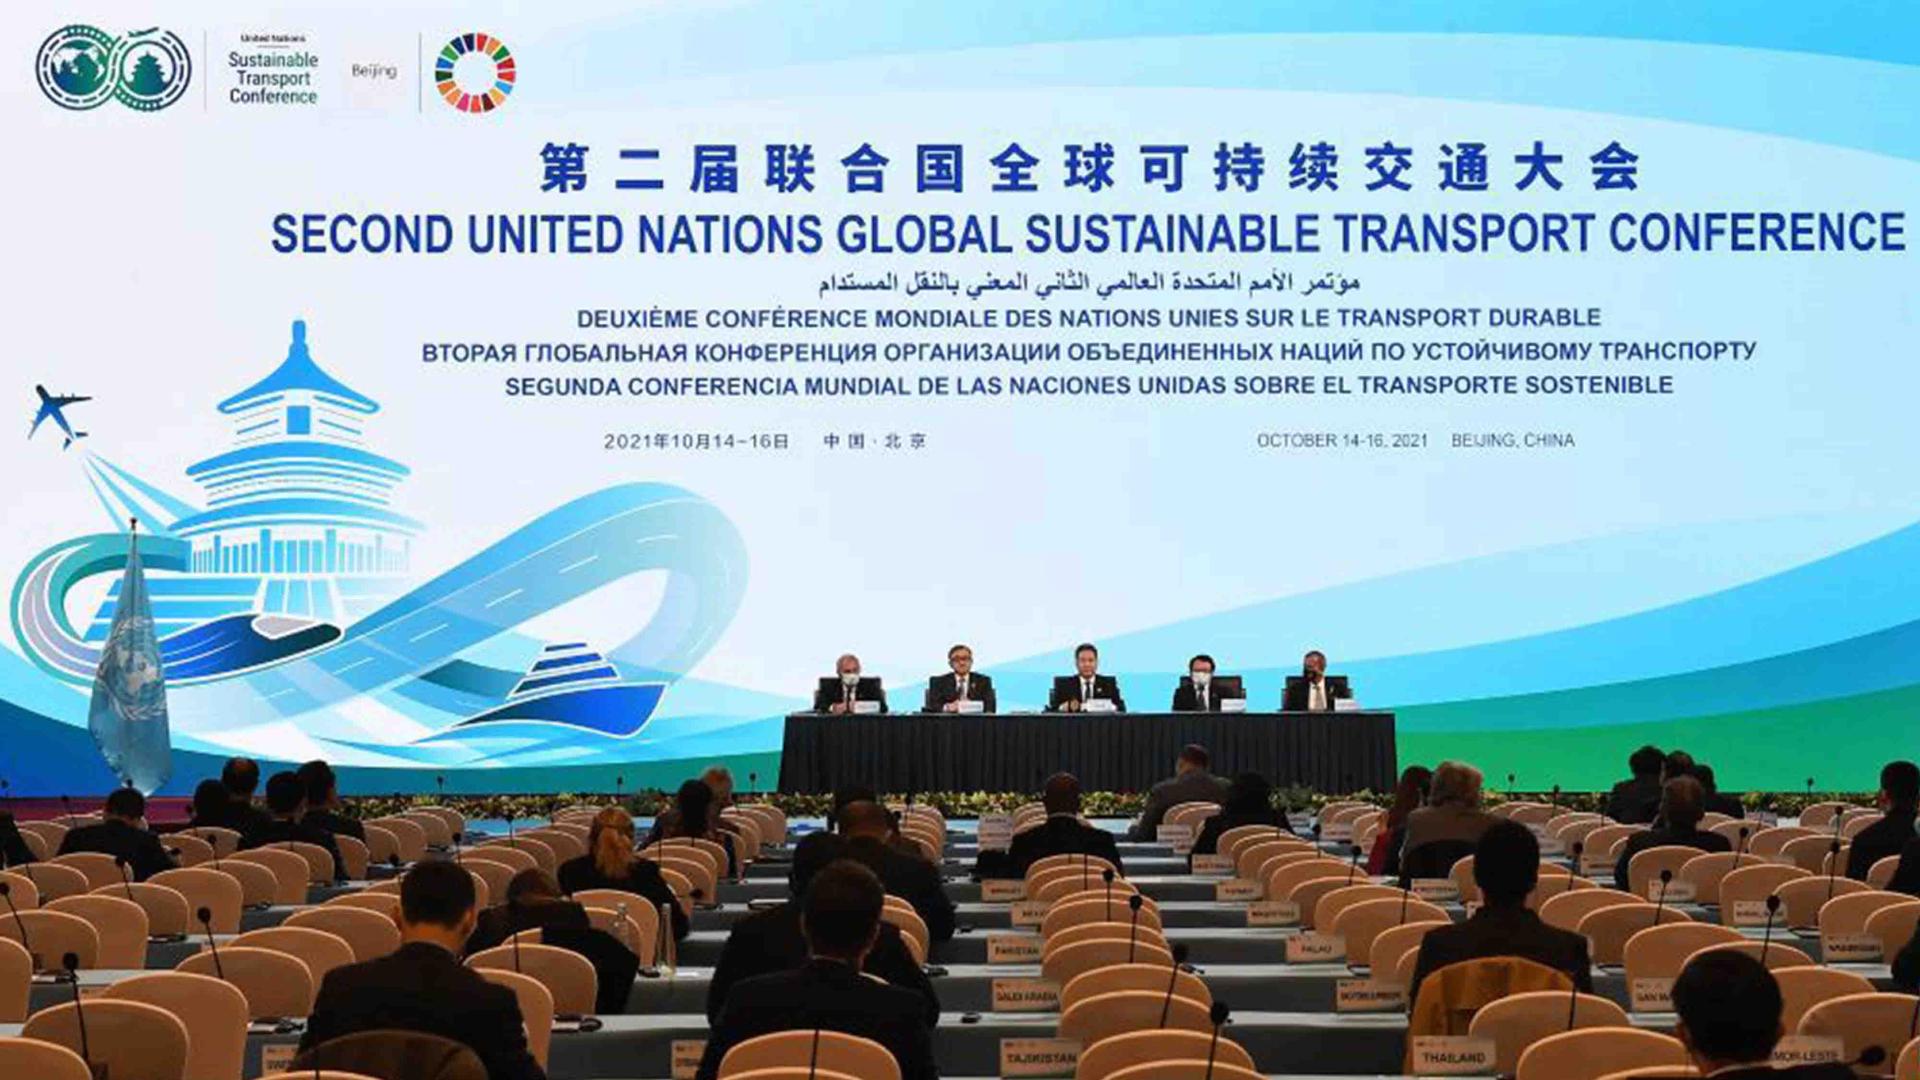 2nd UN Global Sustainable Transport Conference concludes in Beijing CGTN